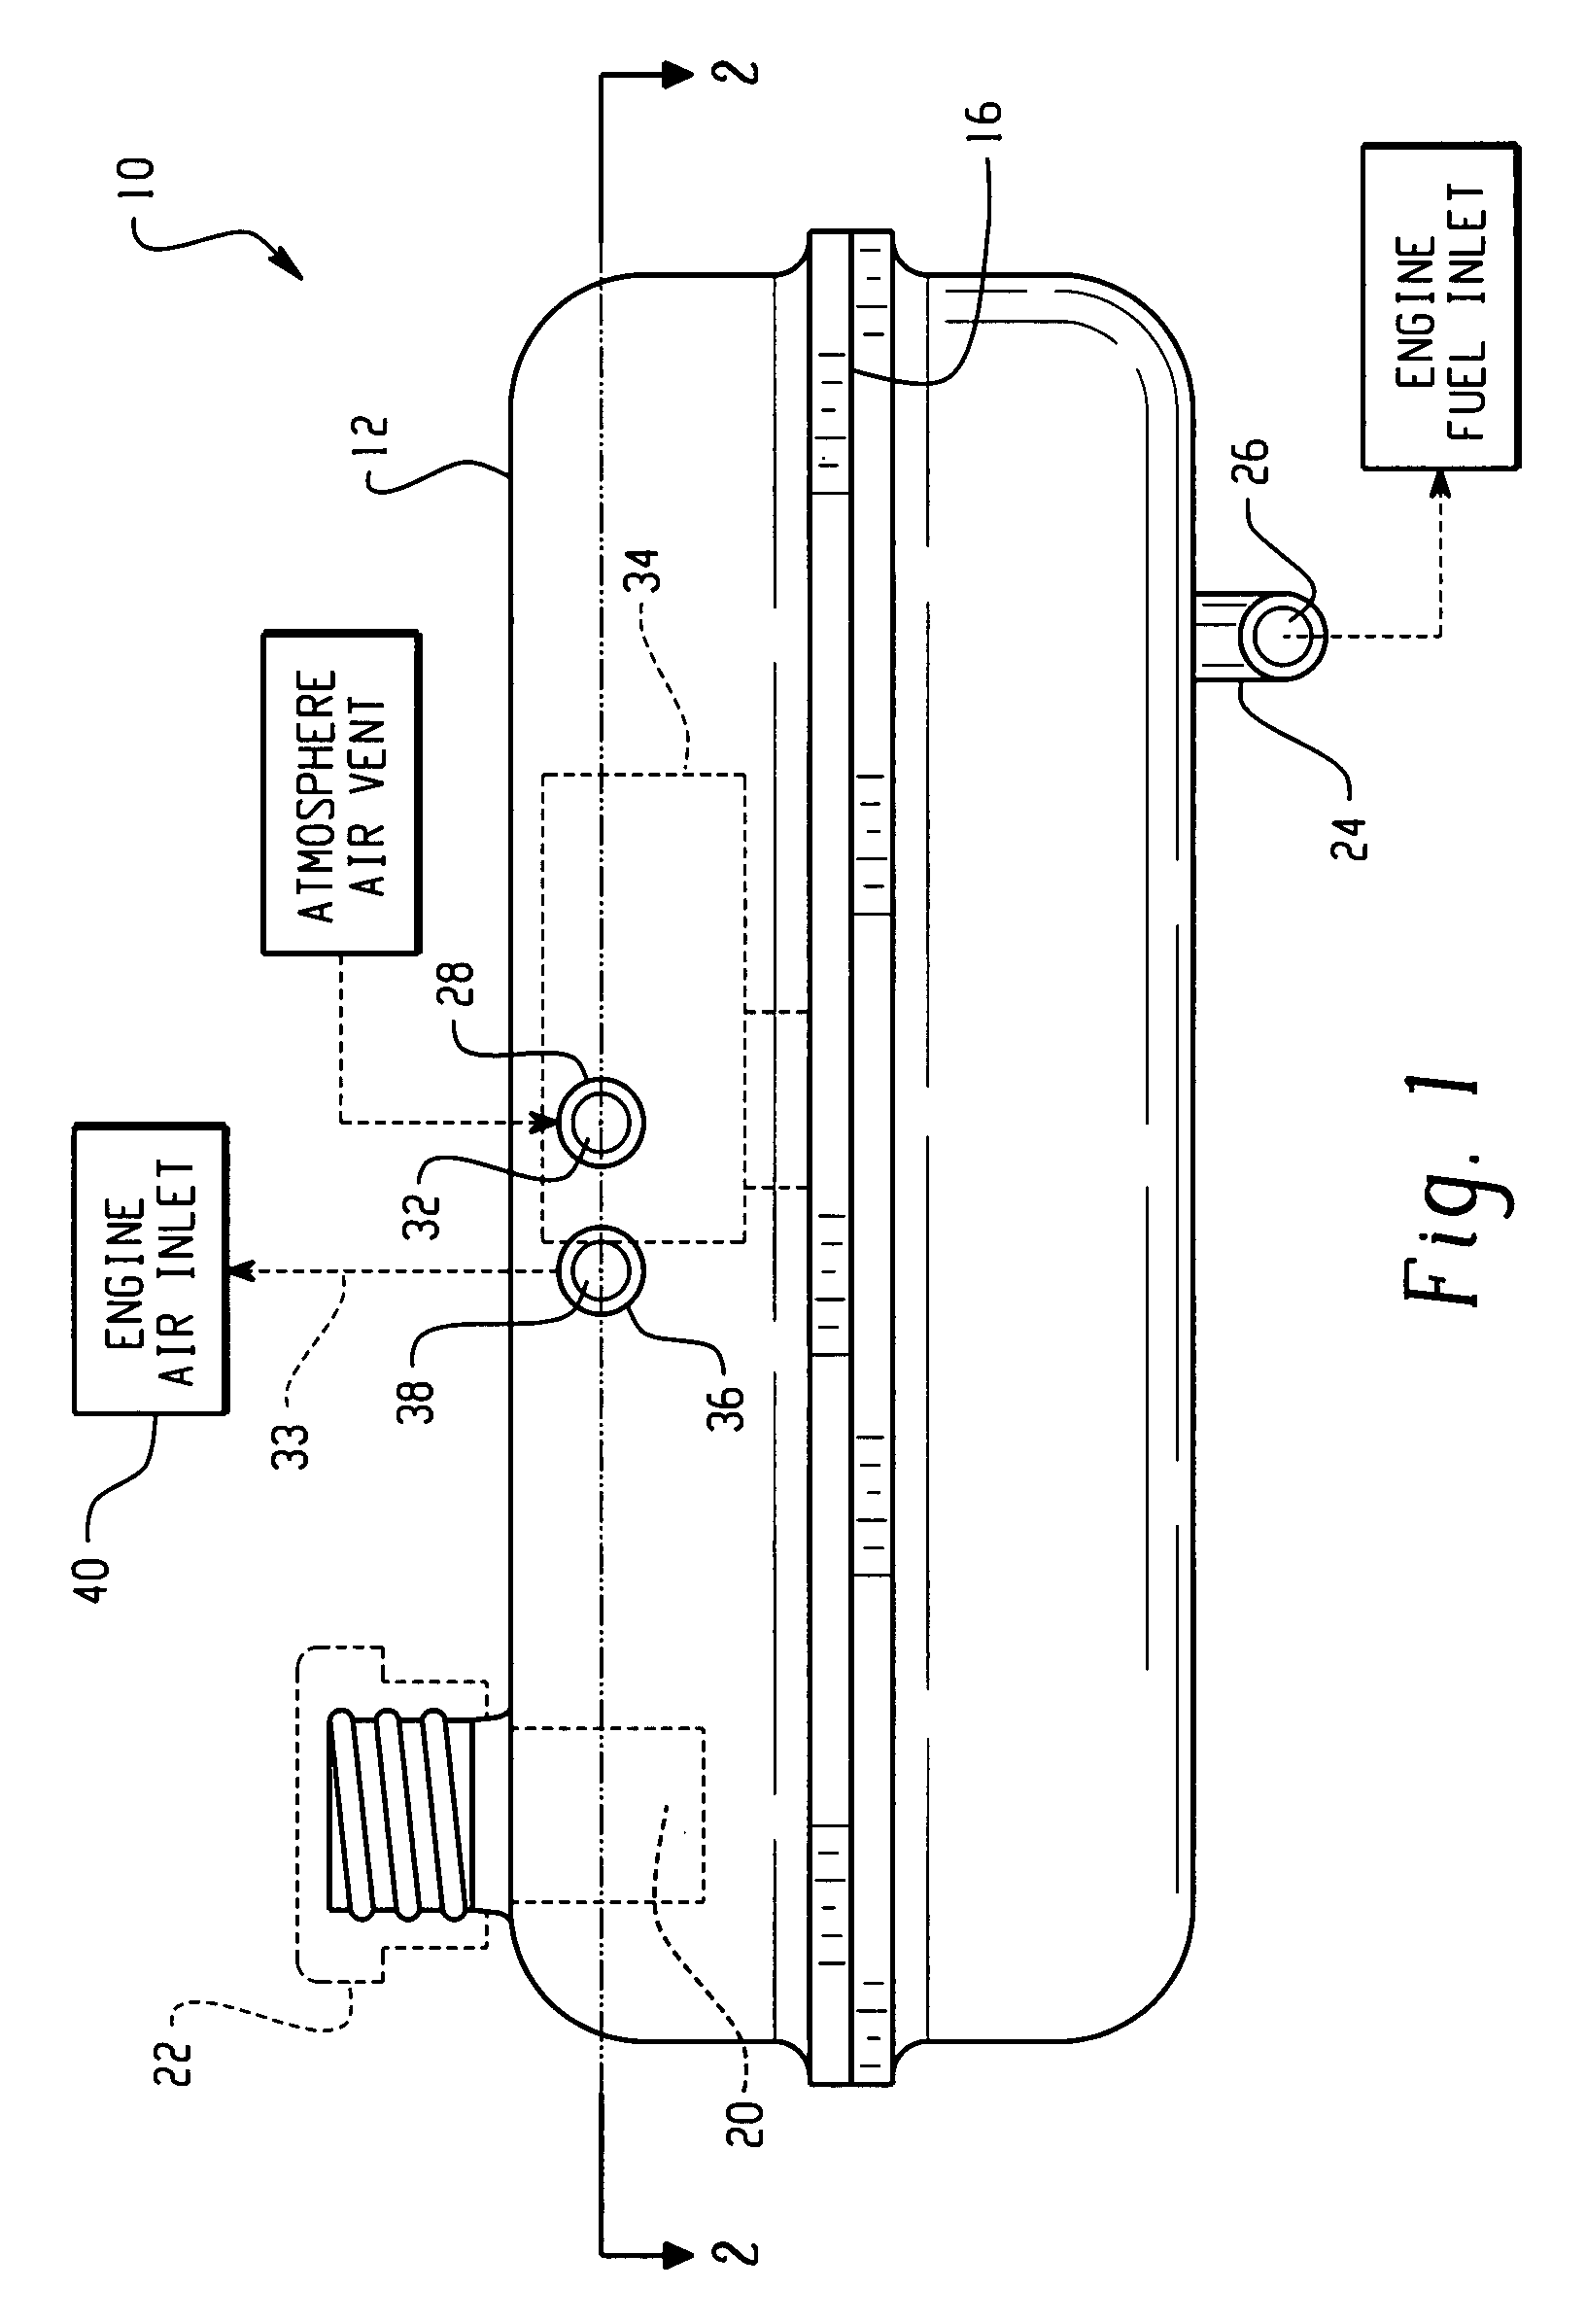 Small engine fuel tank with integrated evaporative controls